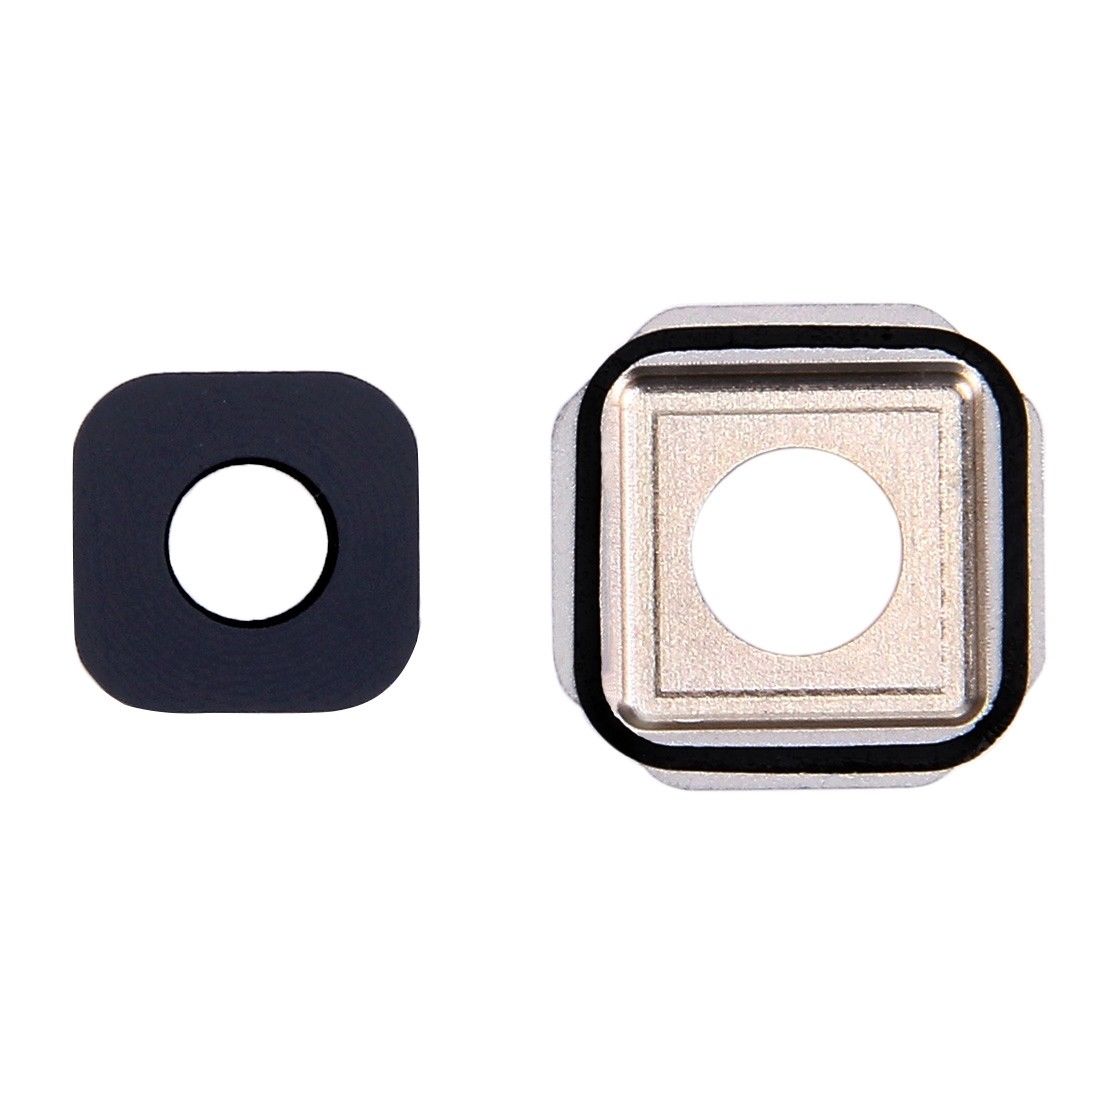 Samsung Galaxy A3 / A5 / A7 2016 Camera Lens Glass With Frame - Gold for [product_price] - First Help Tech